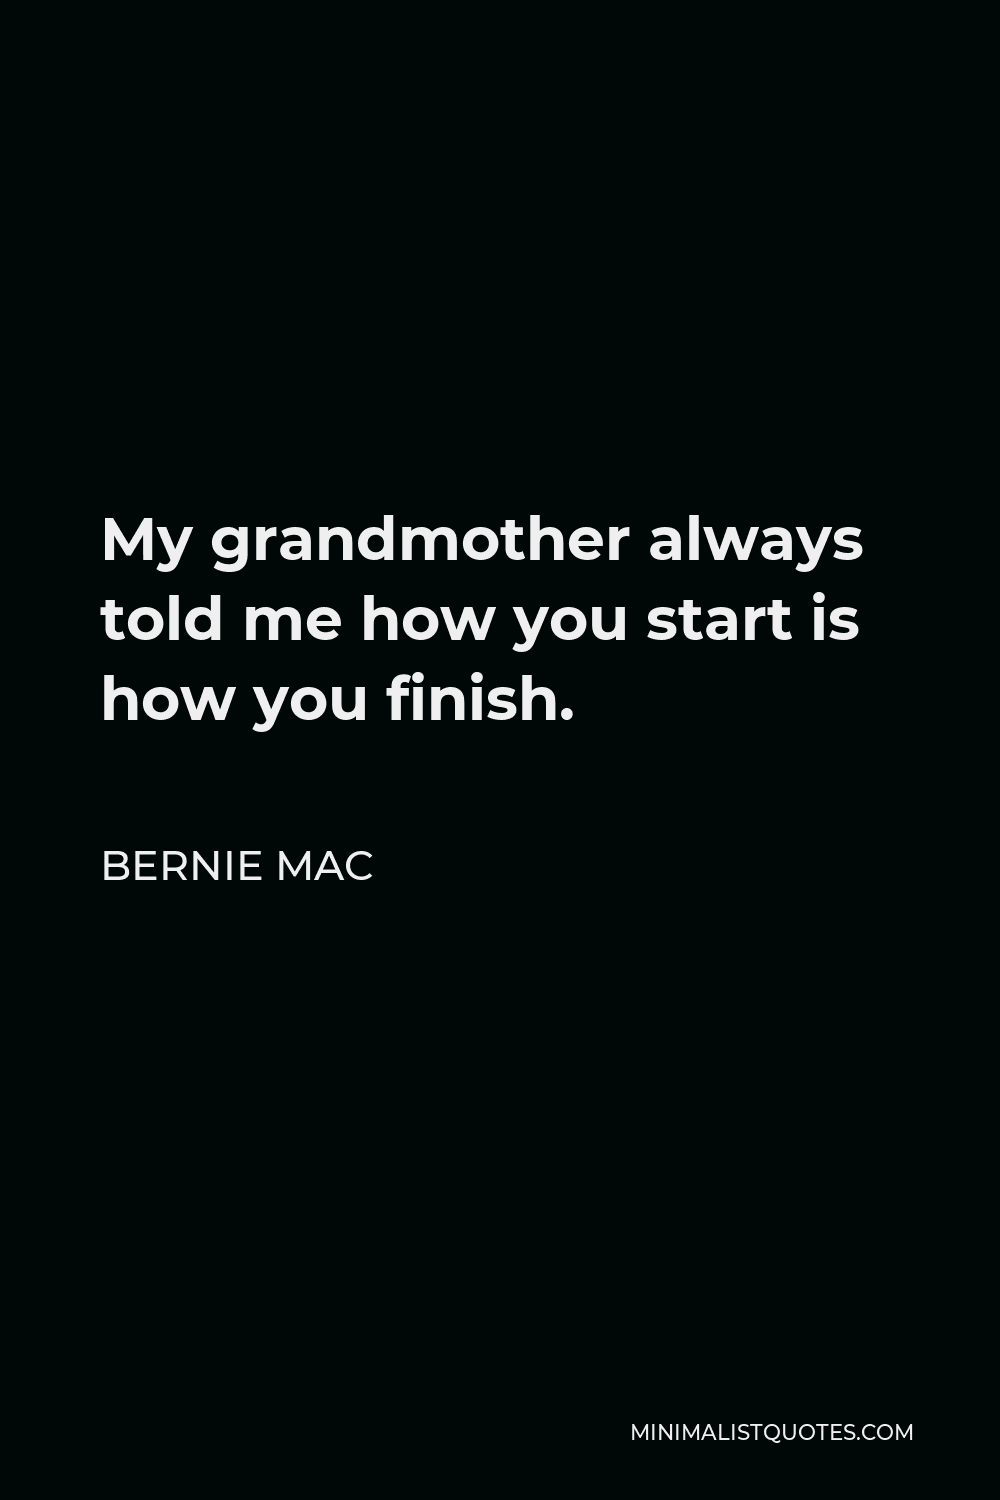 Bernie Mac Quote - My grandmother always told me how you start is how you finish.